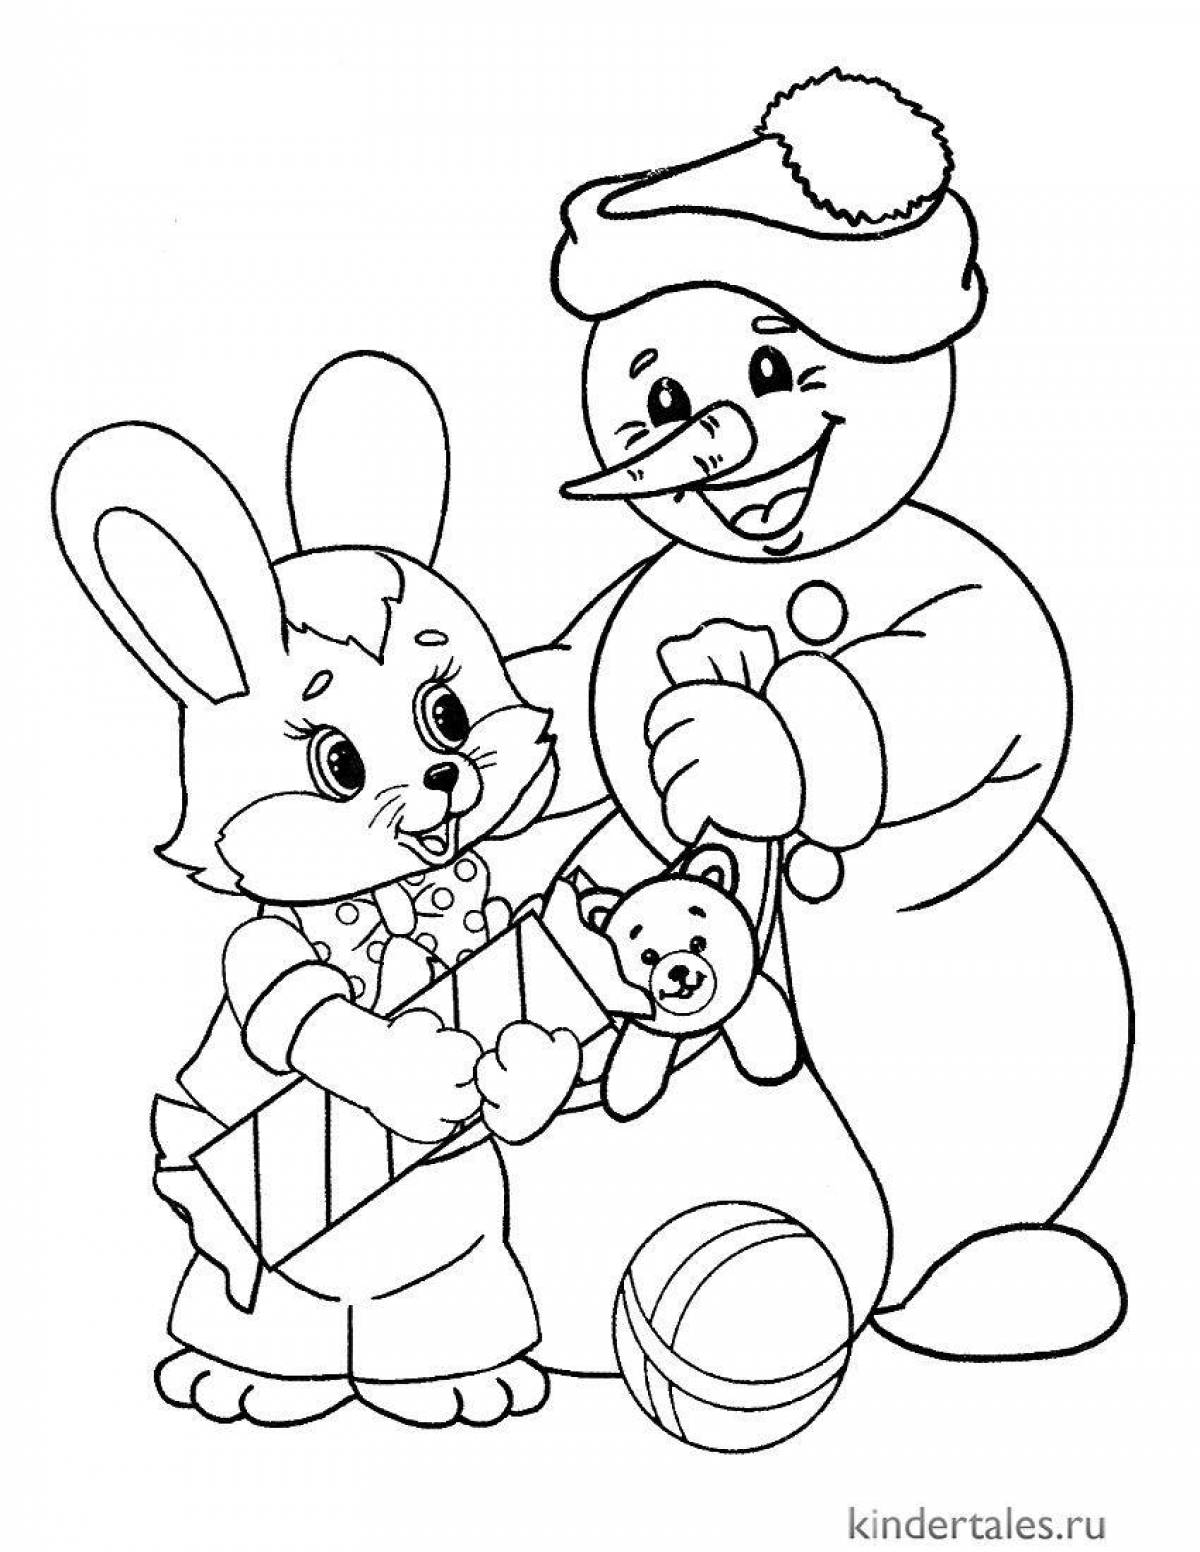 Colourful bunny and snowman coloring page